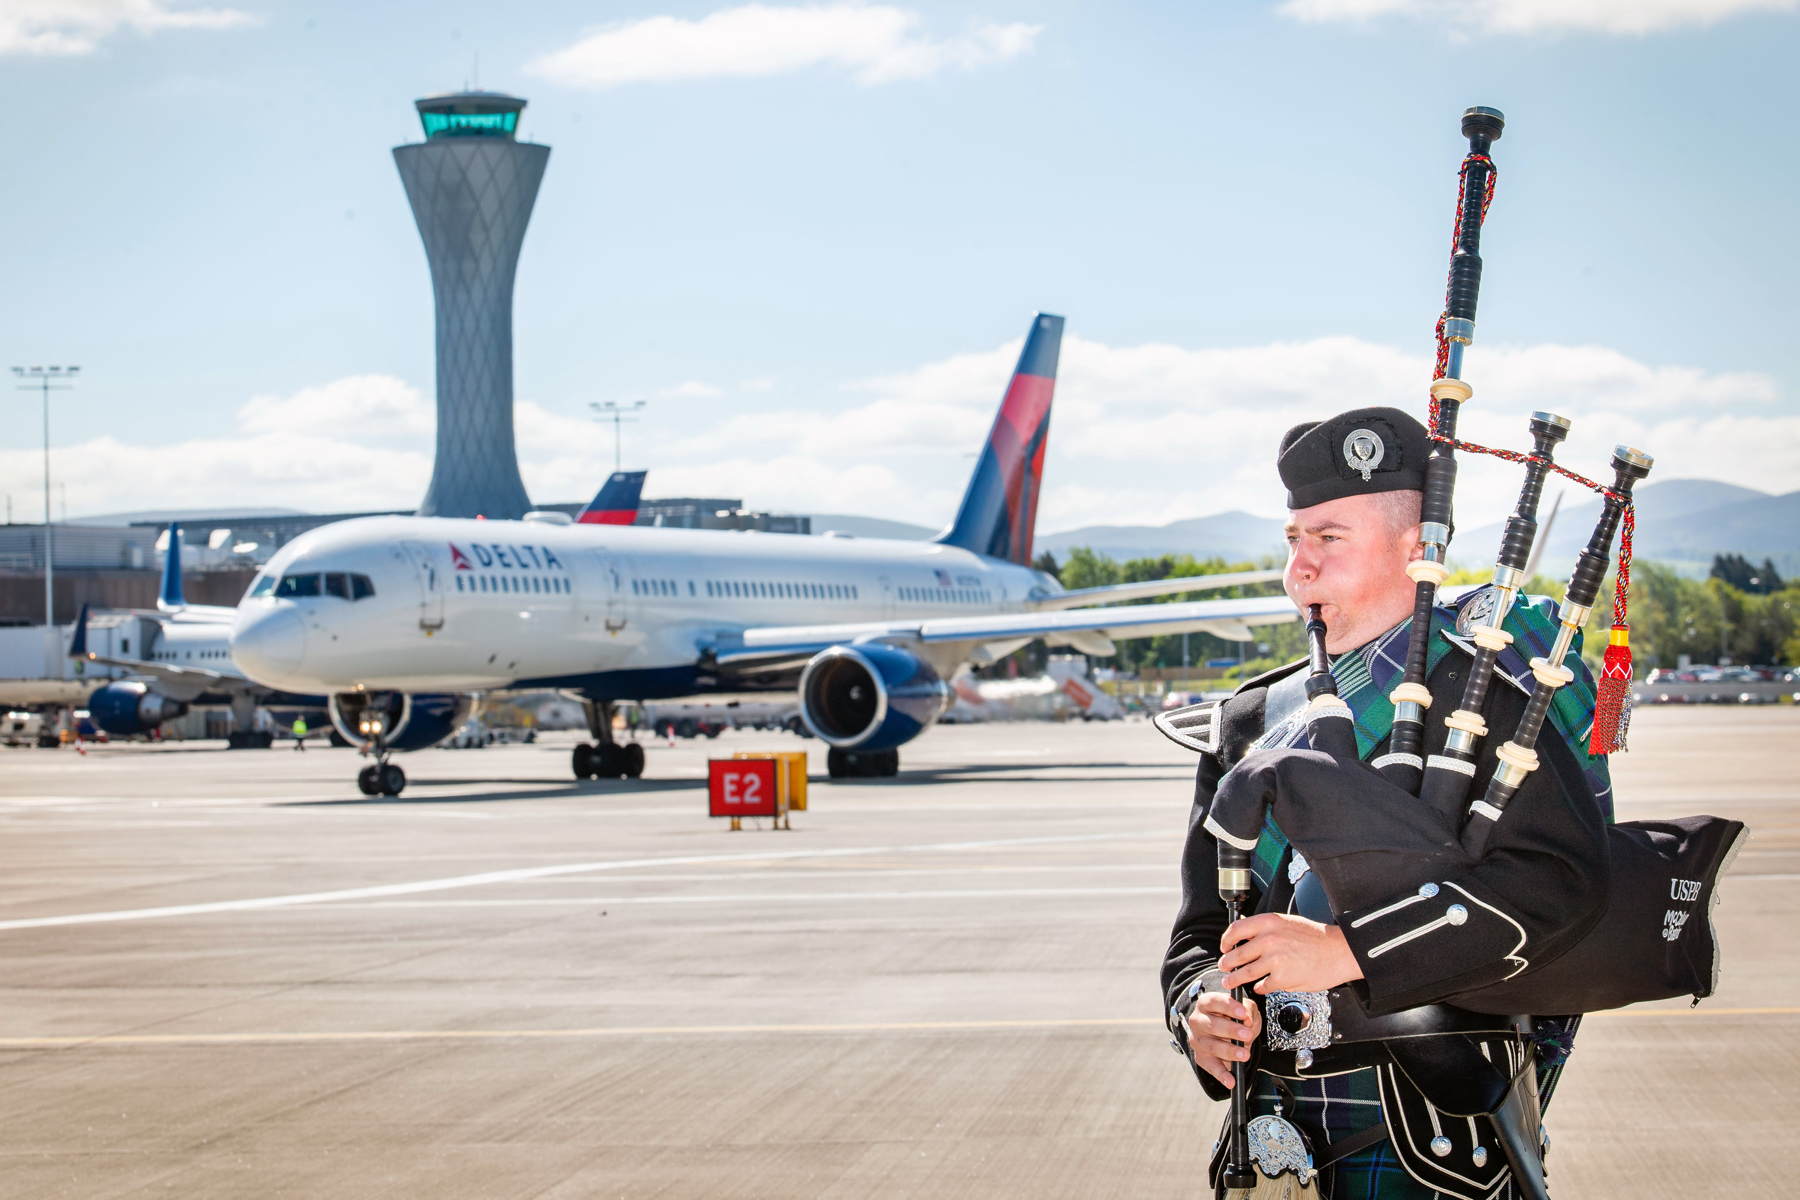 A piper sees off the inaugural flight between Edinburgh and Boston with Delta Air Lines 